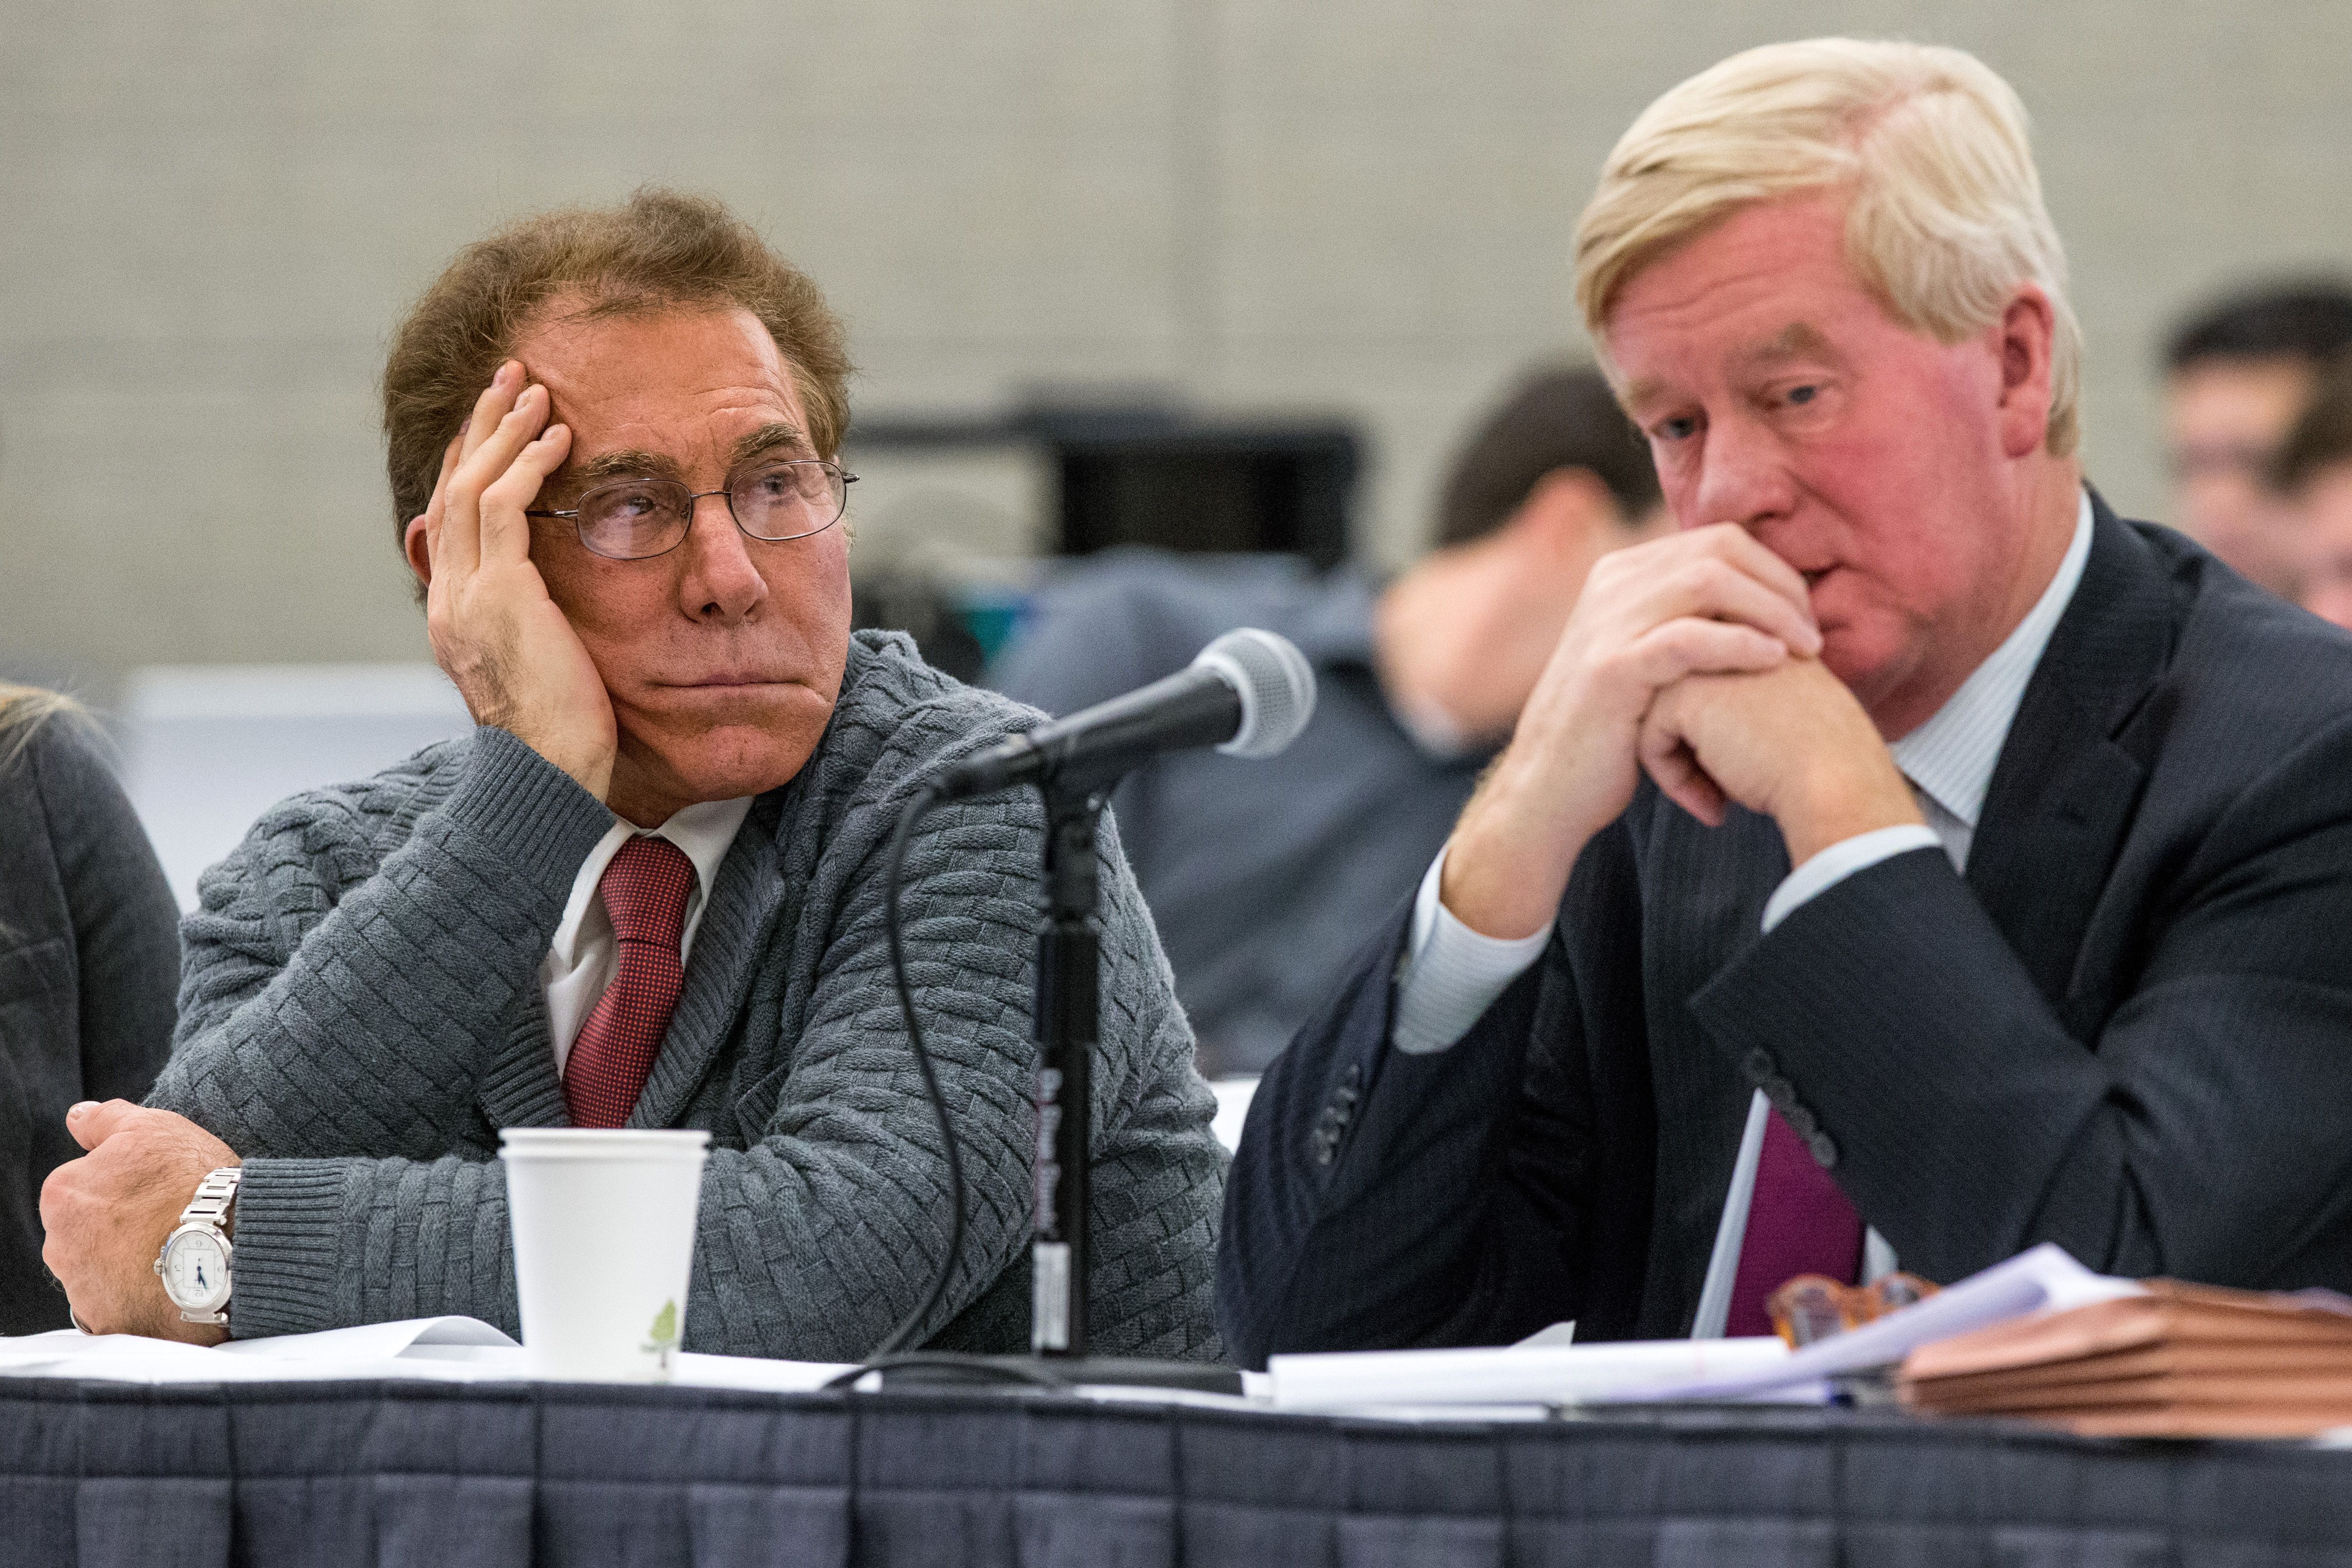 Casino magnate Steve Wynn (left) with chief lobbyist and former Massachusetts Governor William Weld at a meeting of the Massachusetts Gaming Commission.